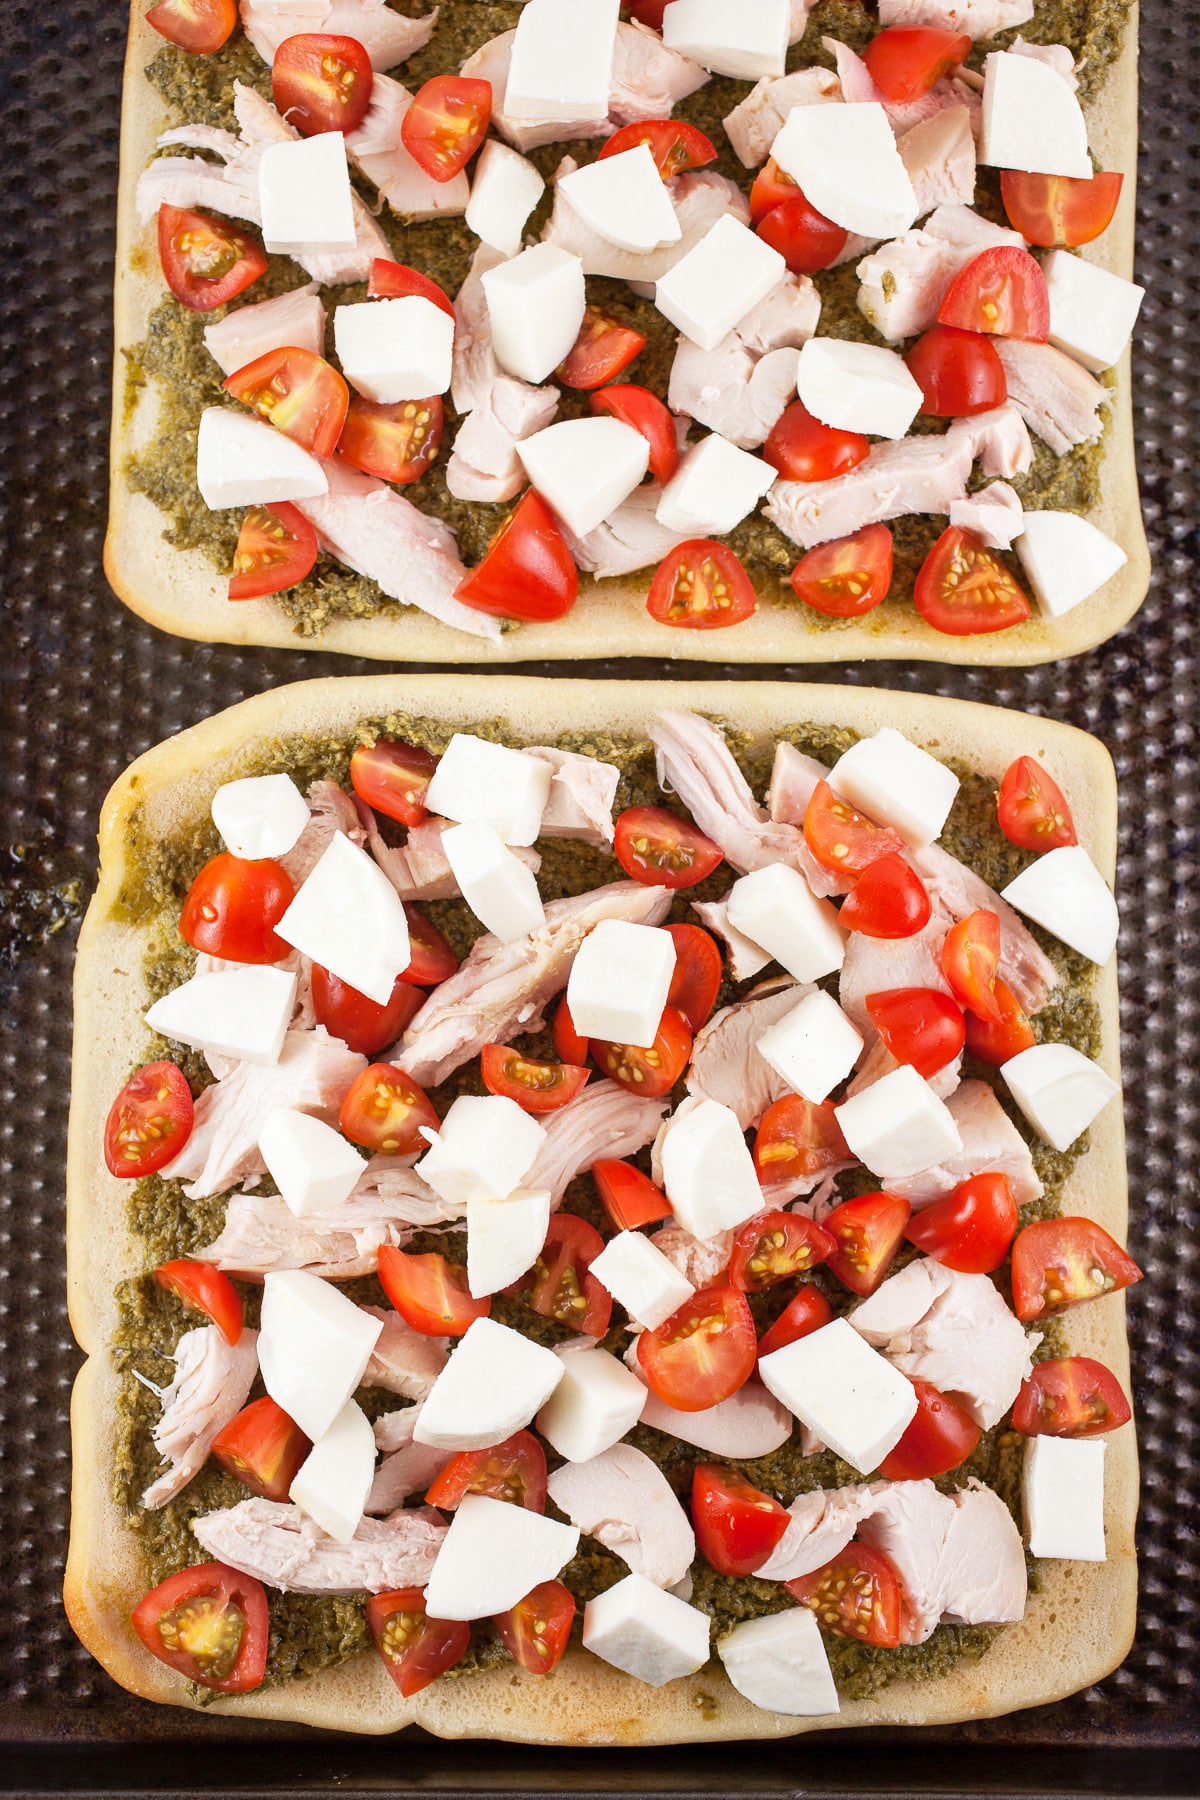 Uncooked flatbread pizzas on baking sheet.